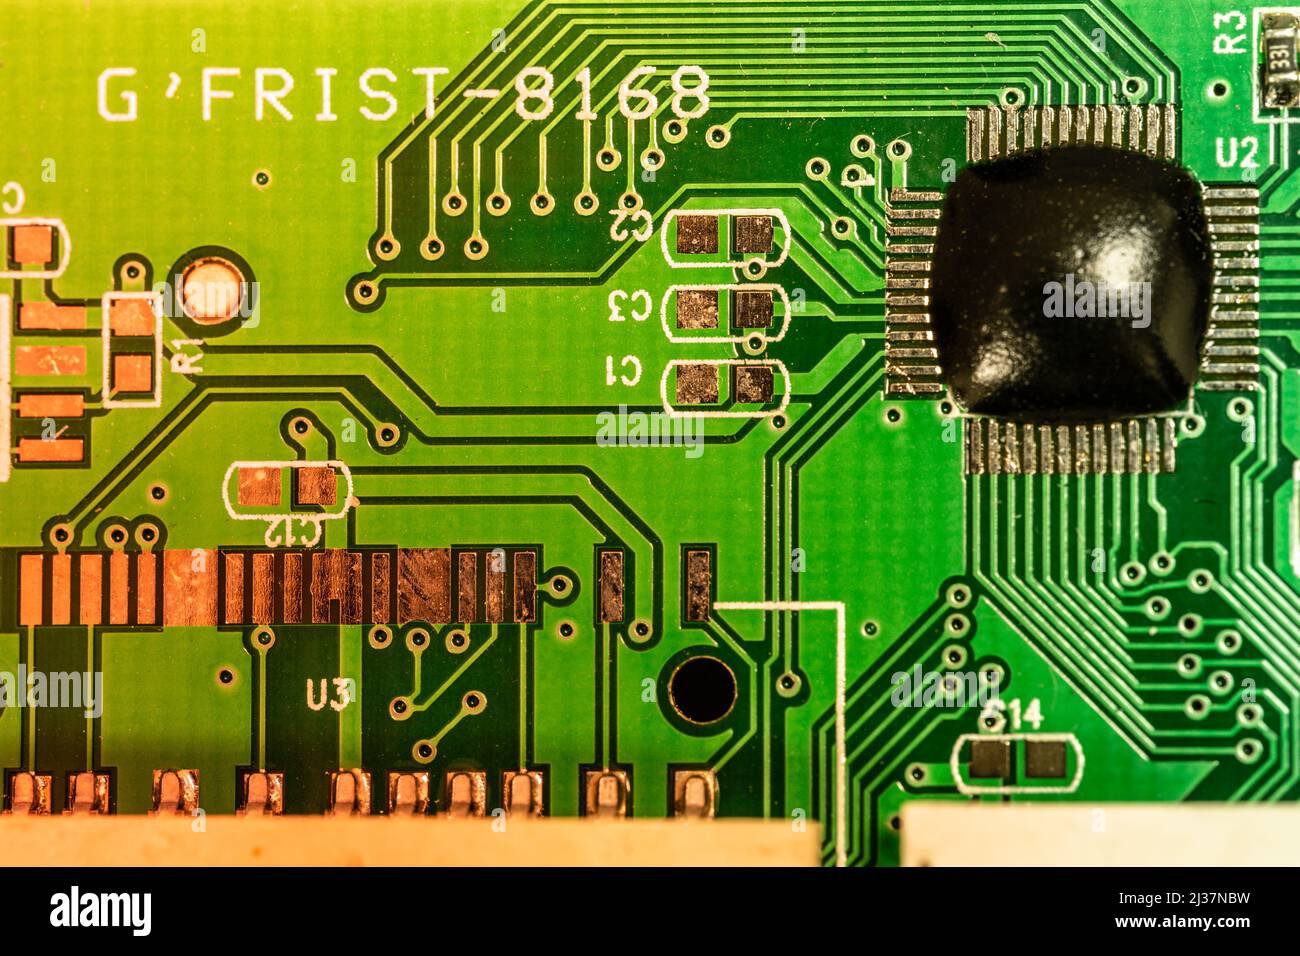 PCB board of a CF, micro SD and SD card reader. Electronic circuit elements and connection inputs on the main board. Stock Photo